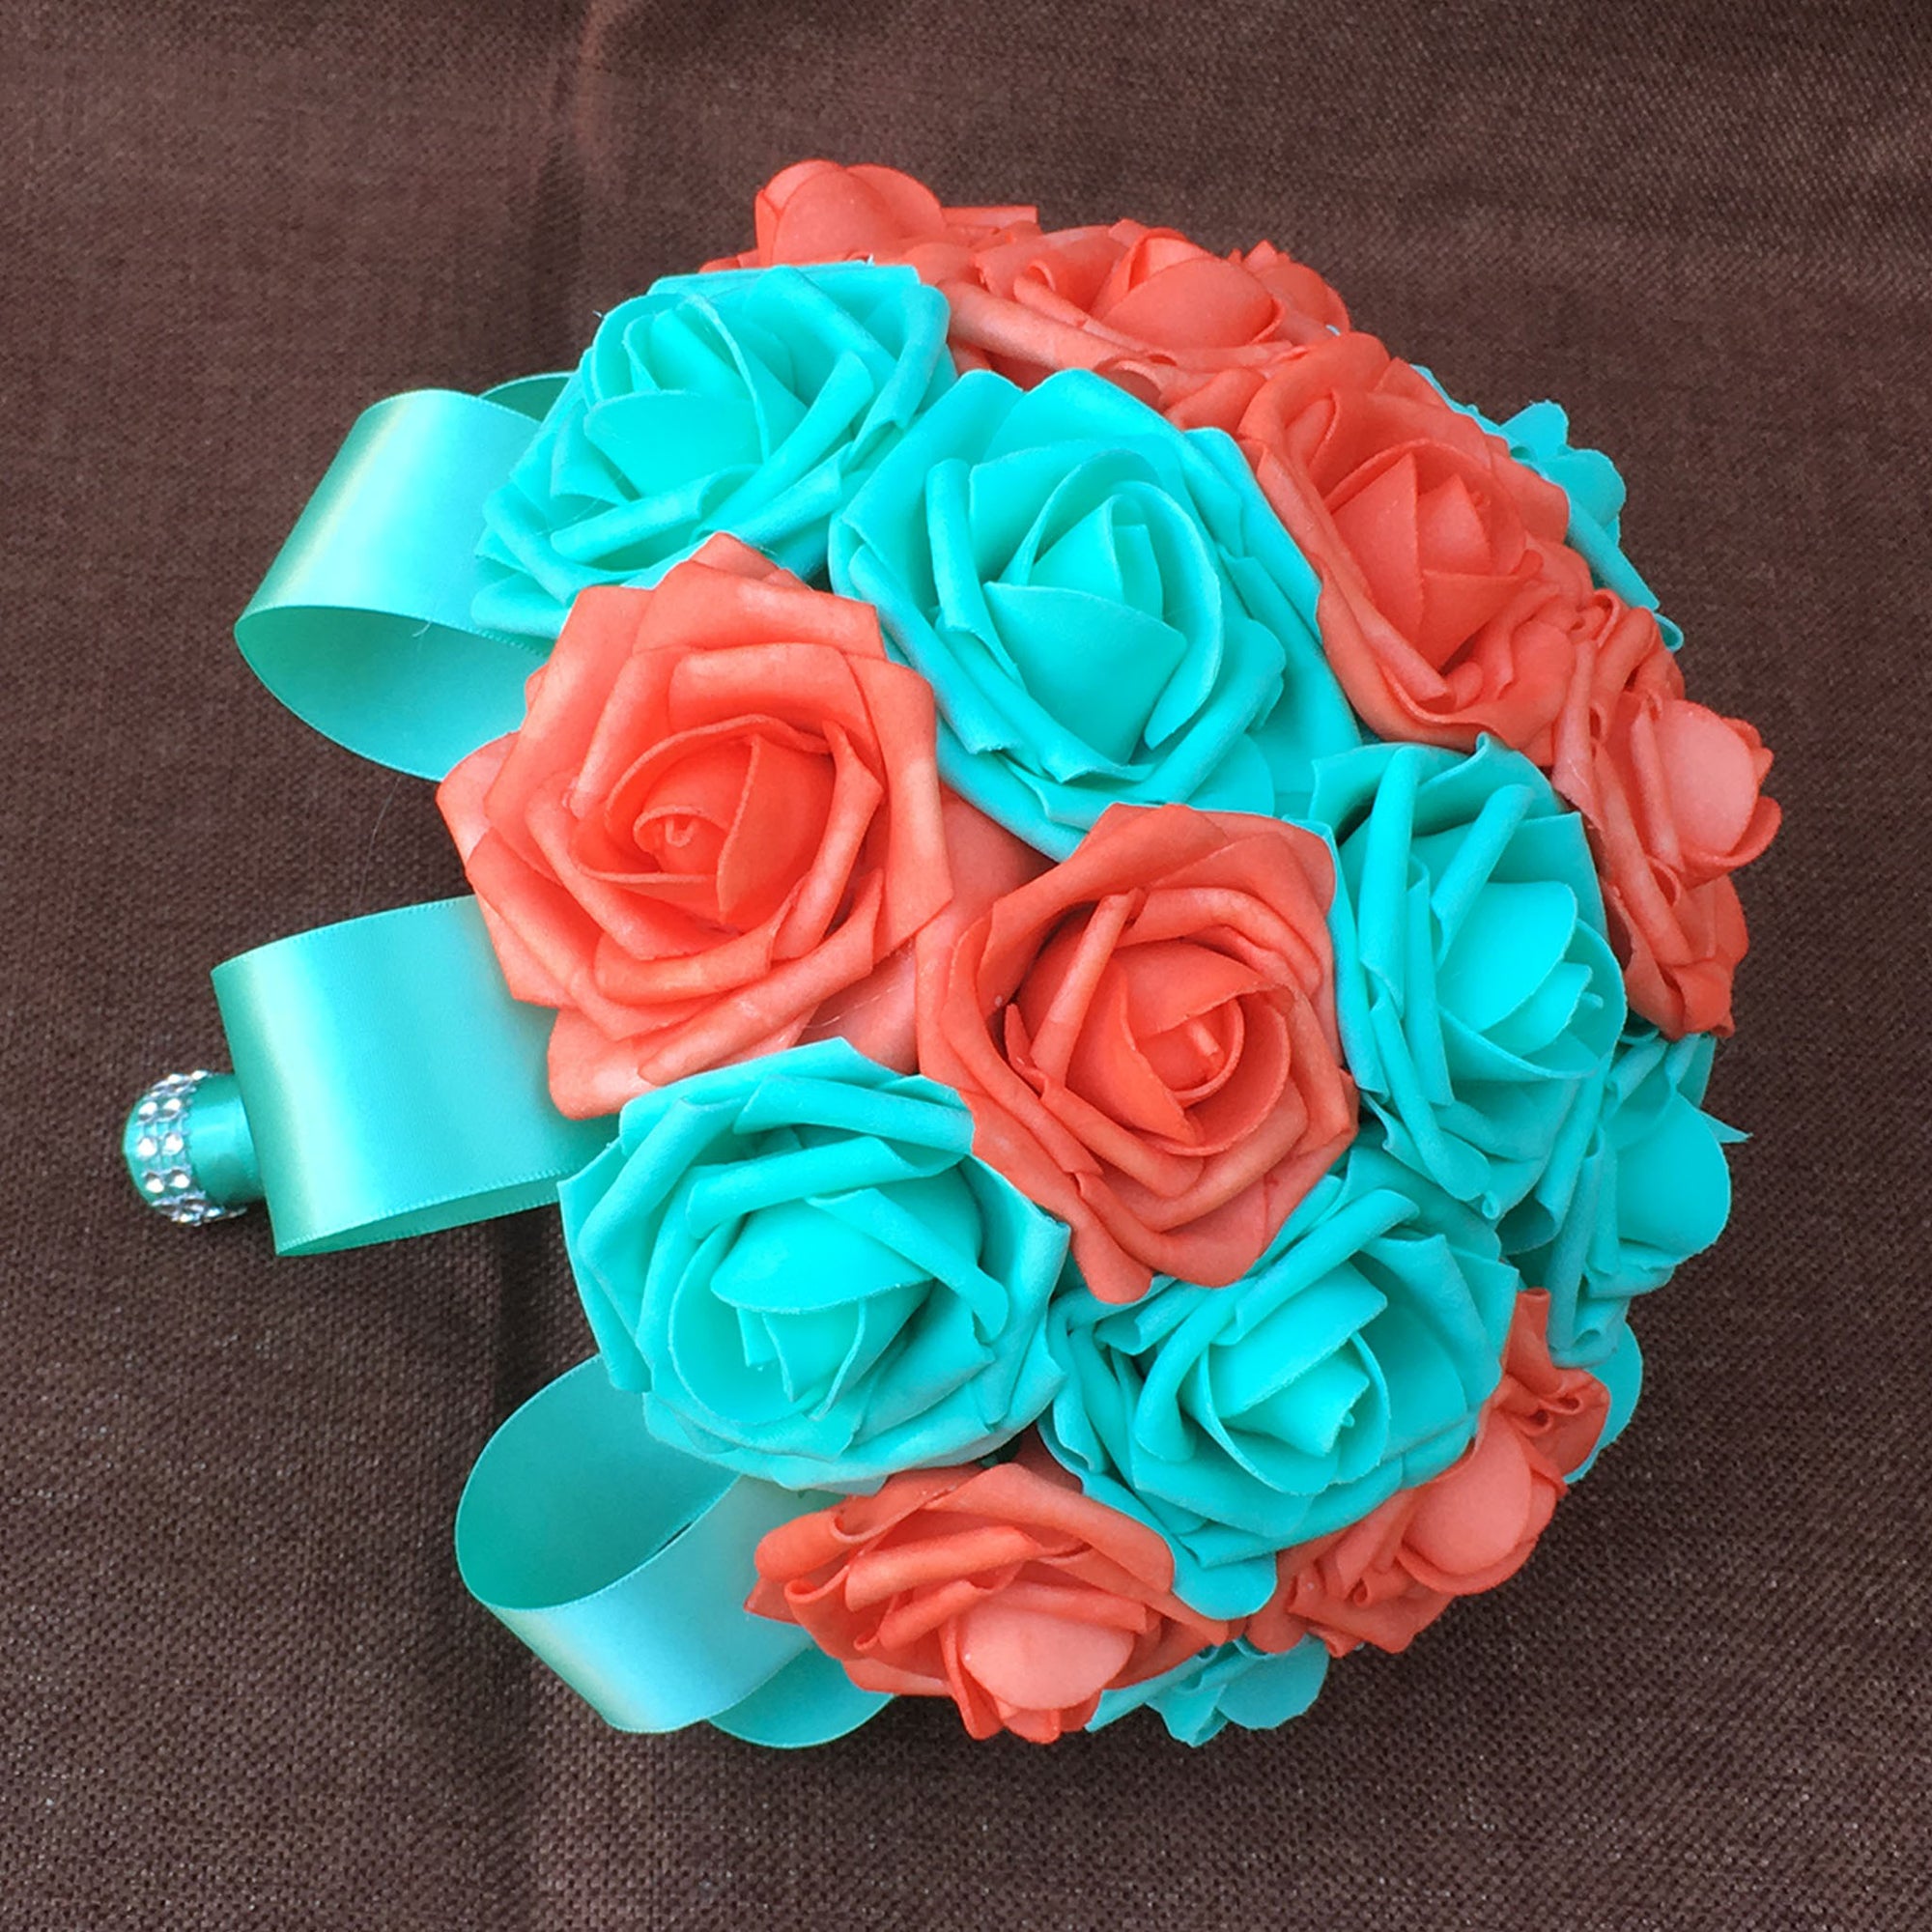 Spa Blue and Coral Bridal Wedding Bouquet